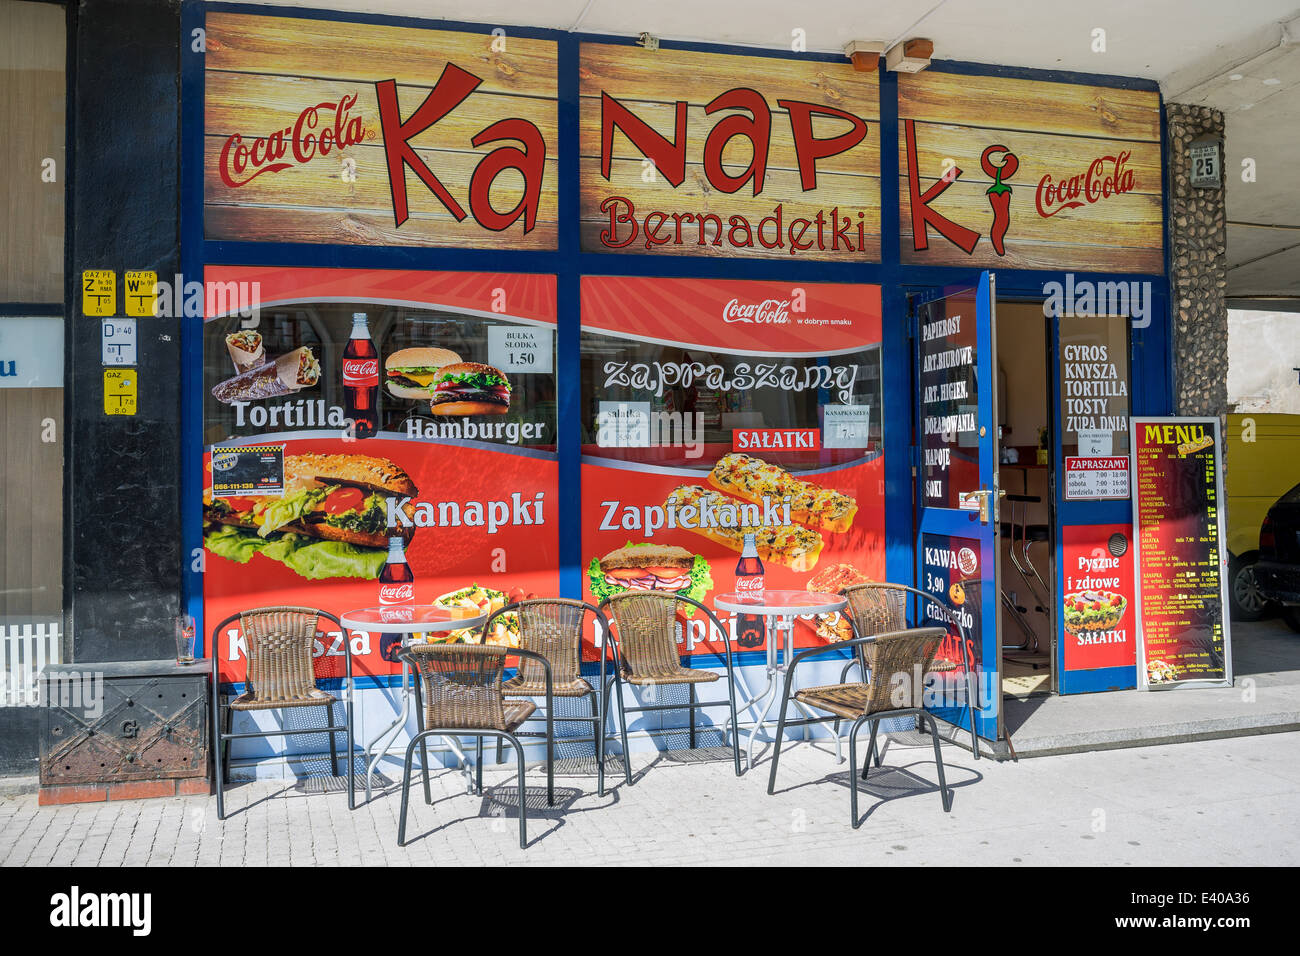 Snack bar Wroclaw Old Town Stock Photo